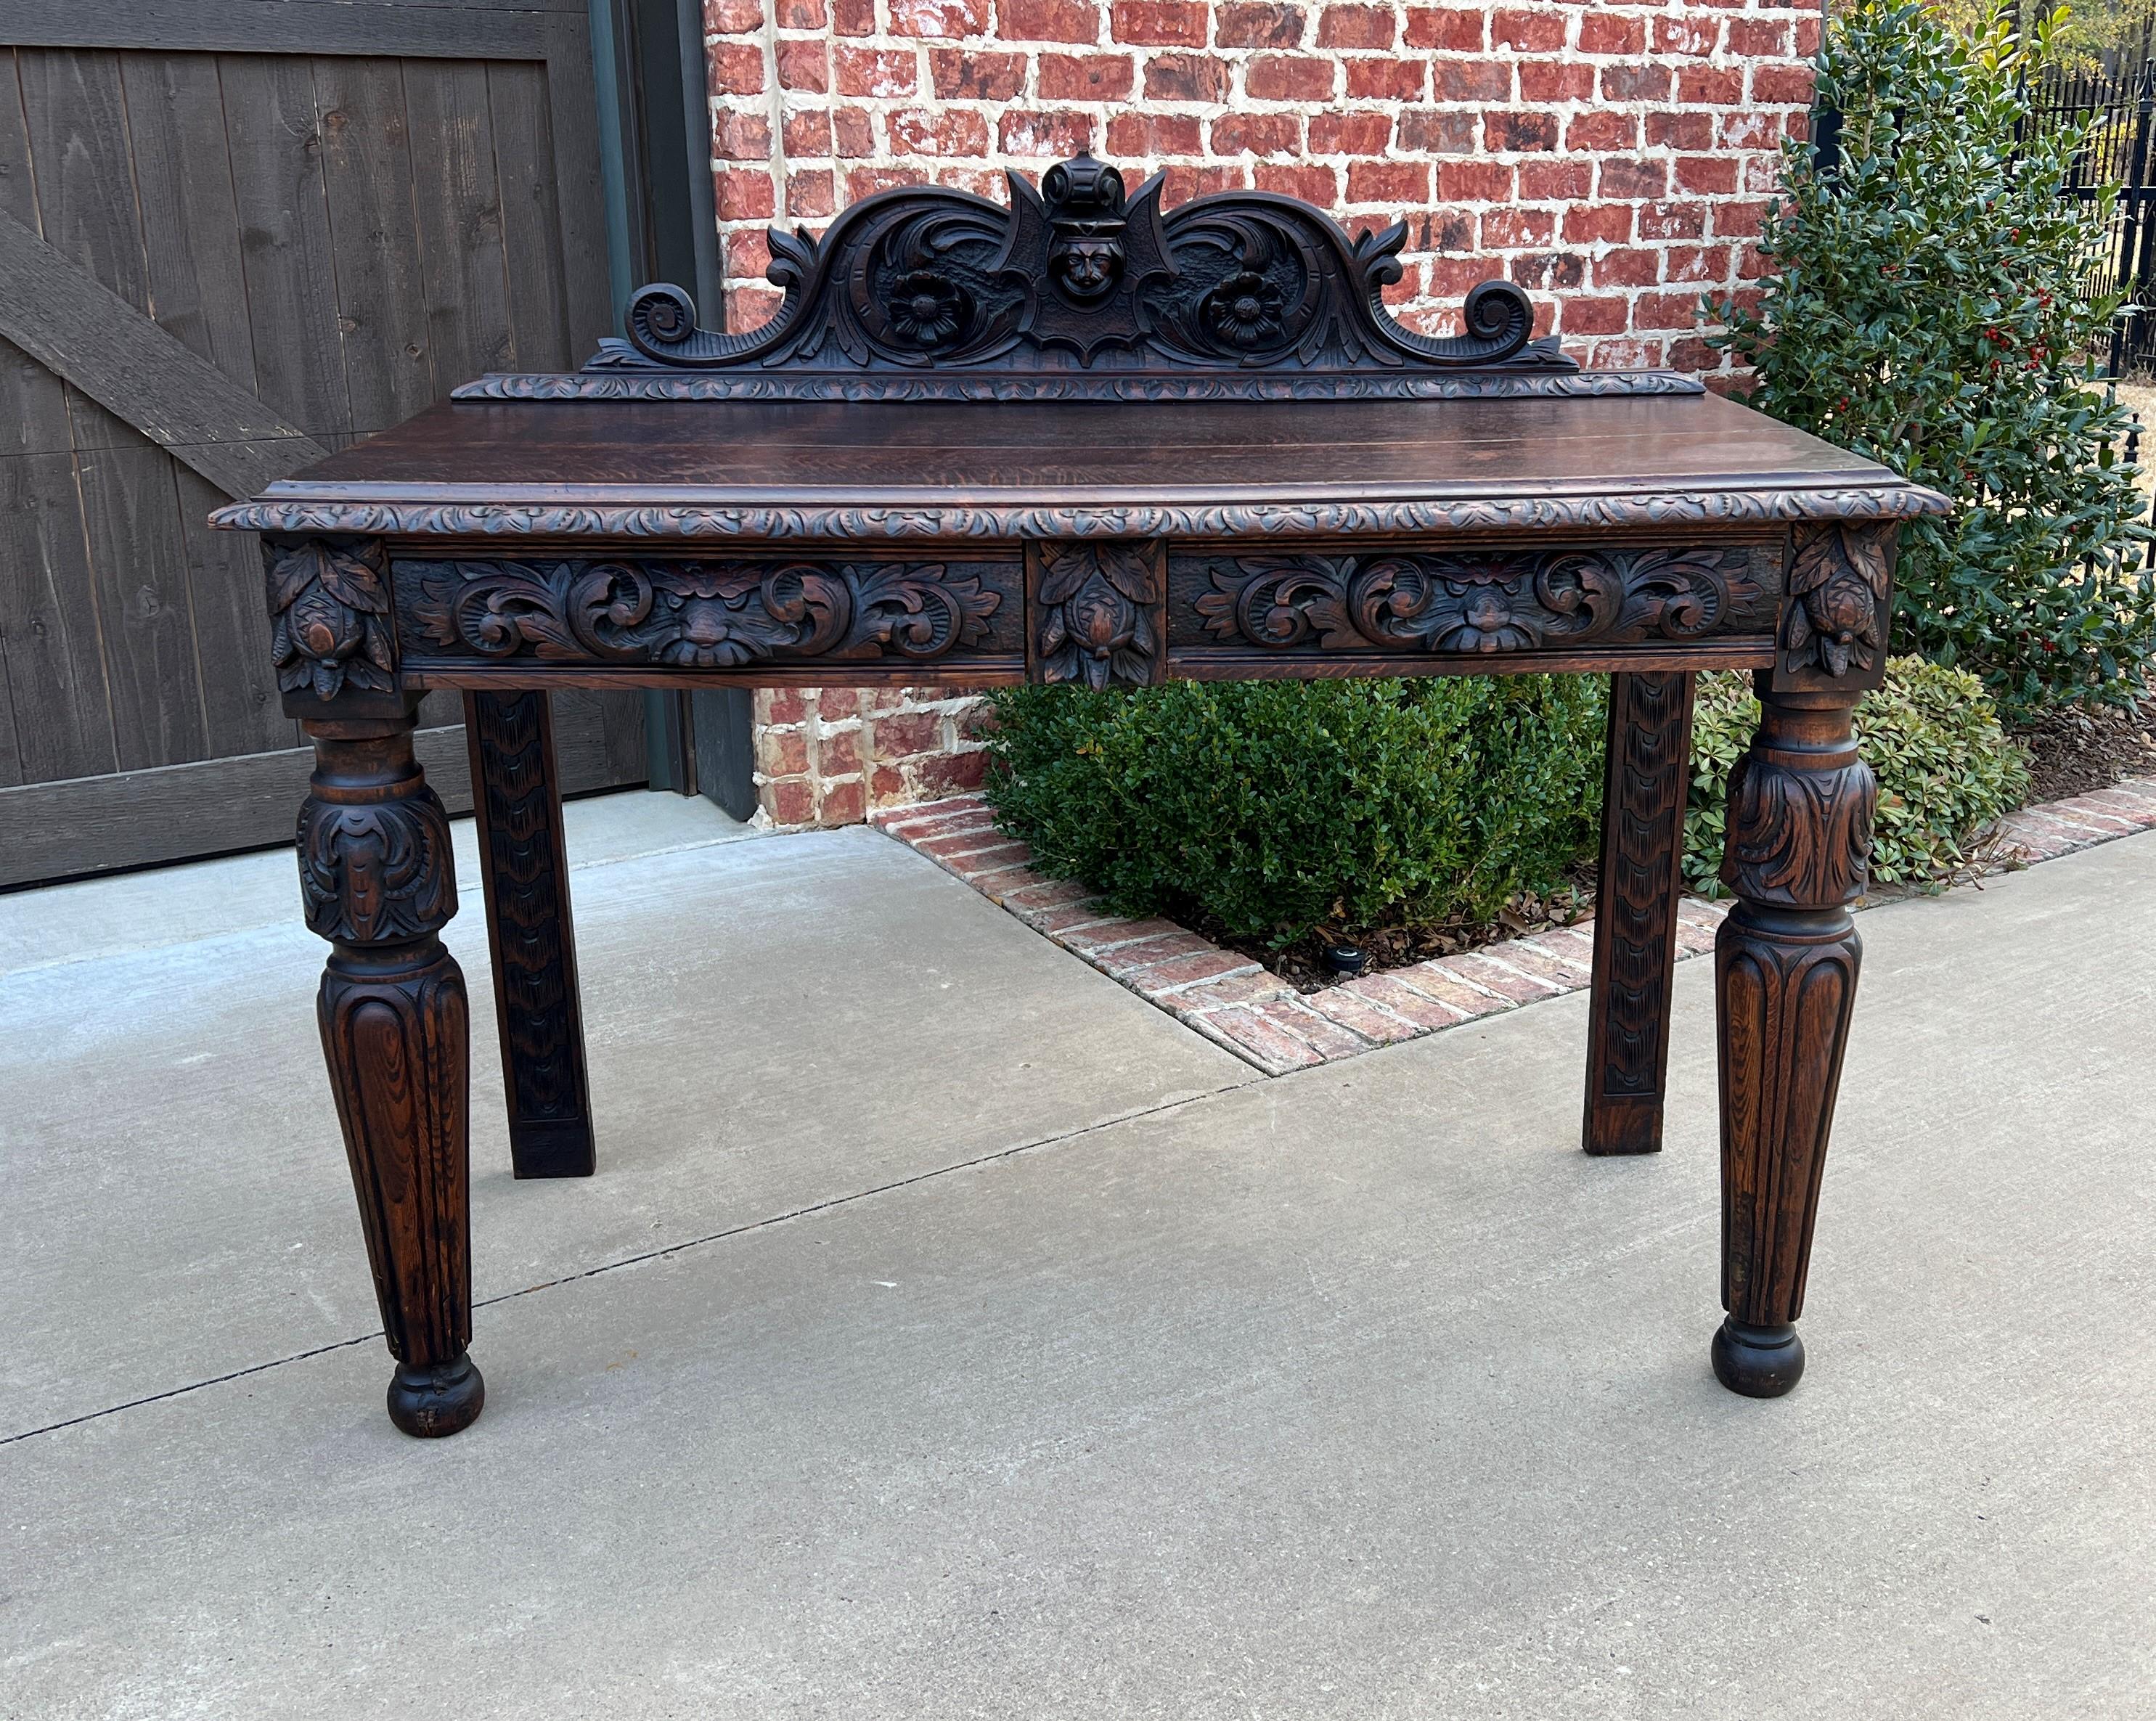 CHARMING Antique French Renaissance revival oak entry, hall table, sofa table or console with drawers ~~c. 1890s

Charming table with two drawers and carved crown~~perfect for use as a hall or entry table or sofa/console table 

Measures: 45